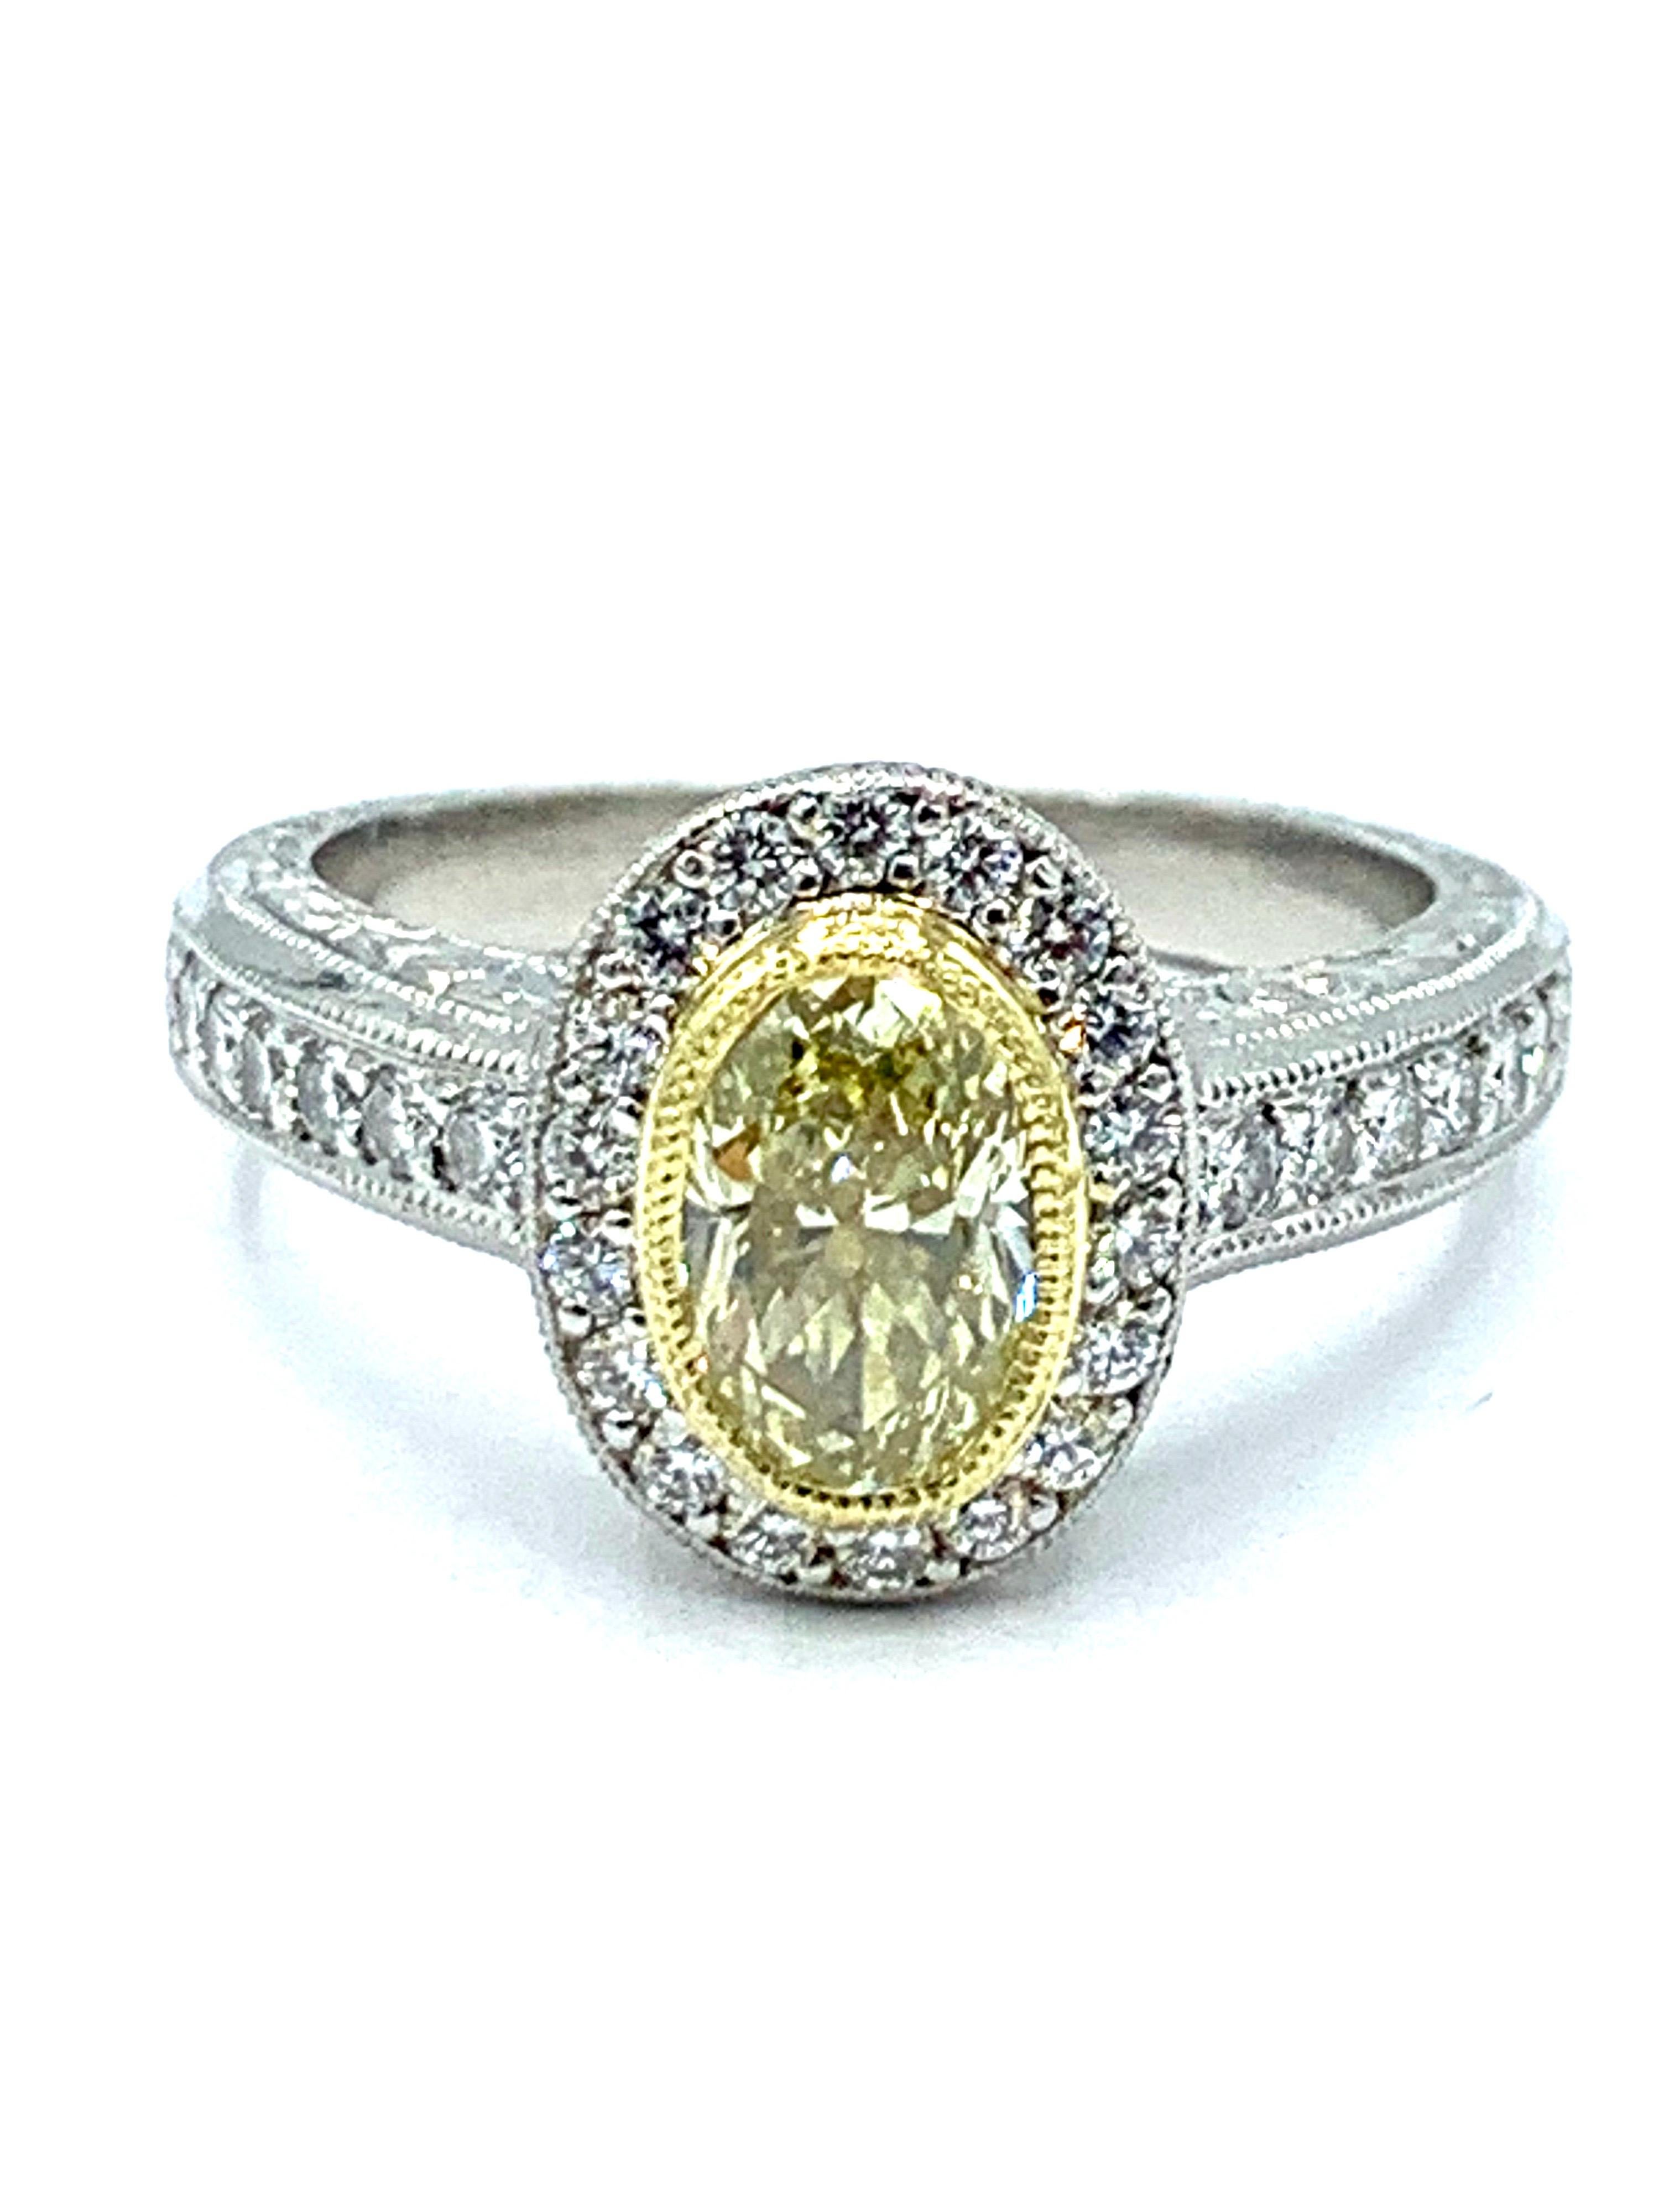 Oval Cut 1.00 Carat Fancy Yellow Oval Diamond Platinum and Yellow Gold Engagement Ring